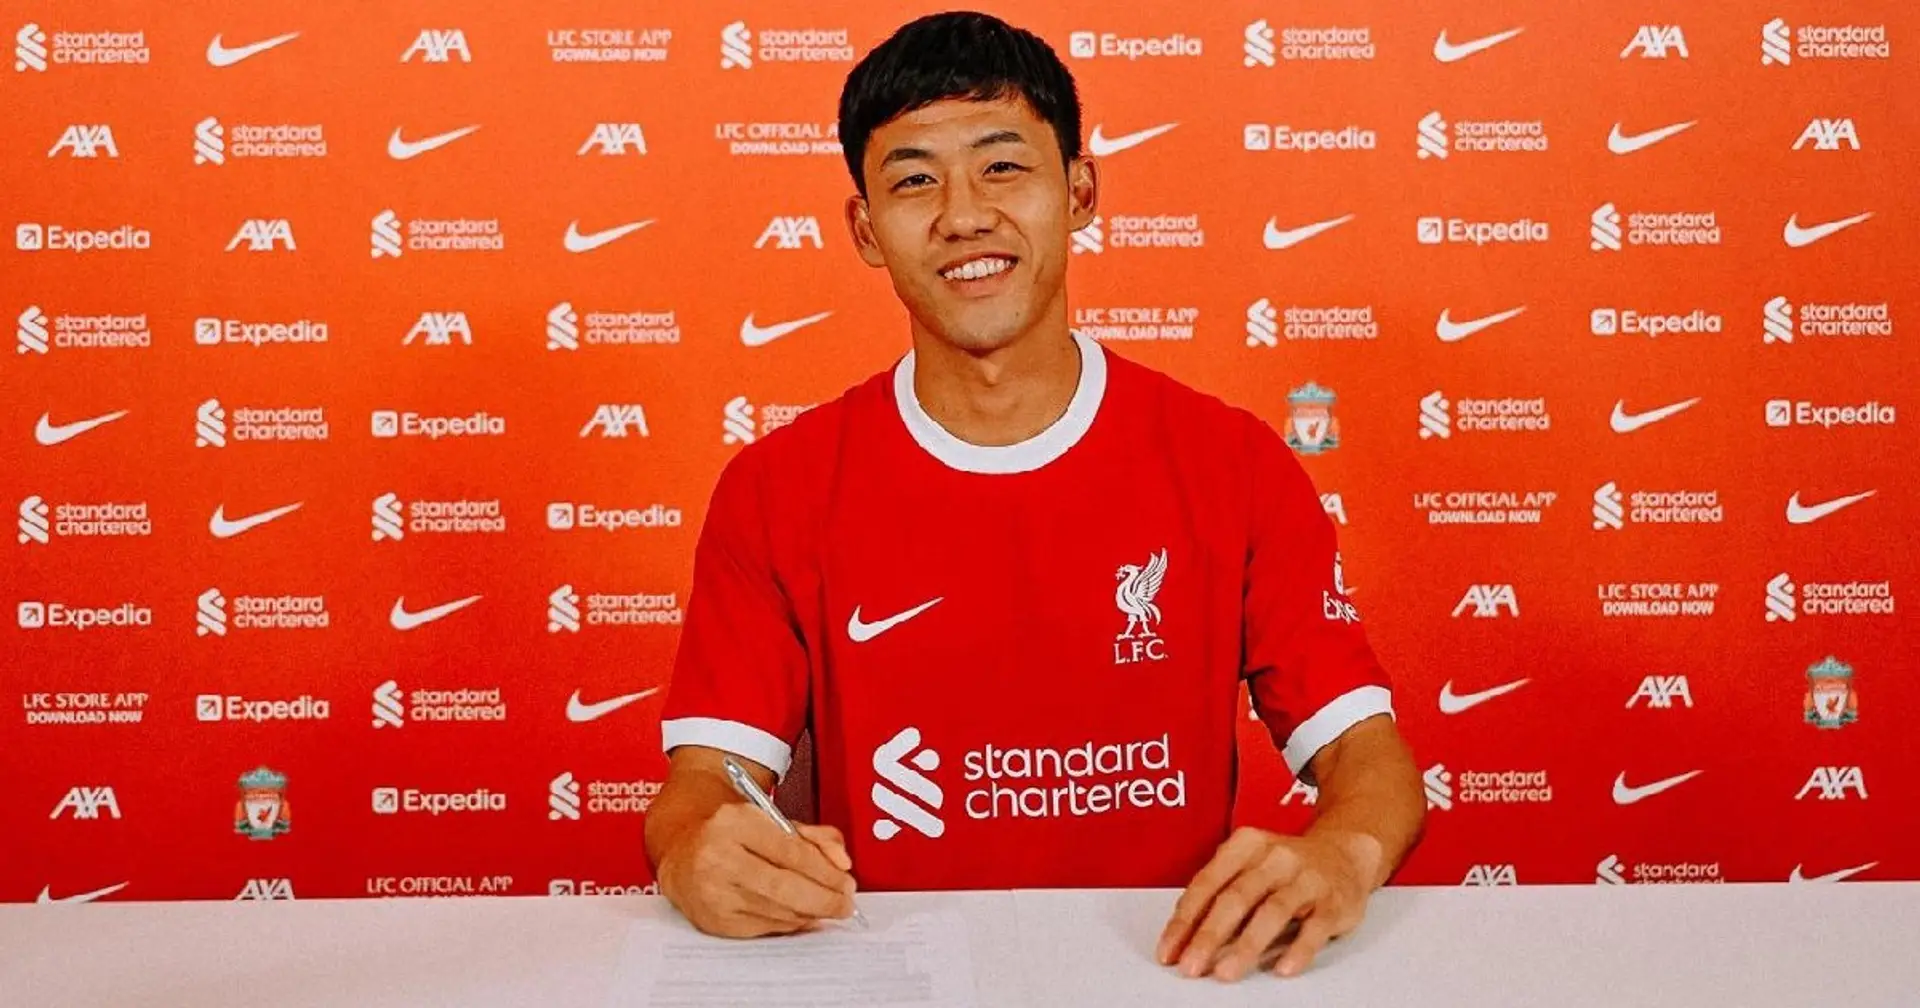 'This is my dream': Endo's first words as a Liverpool player